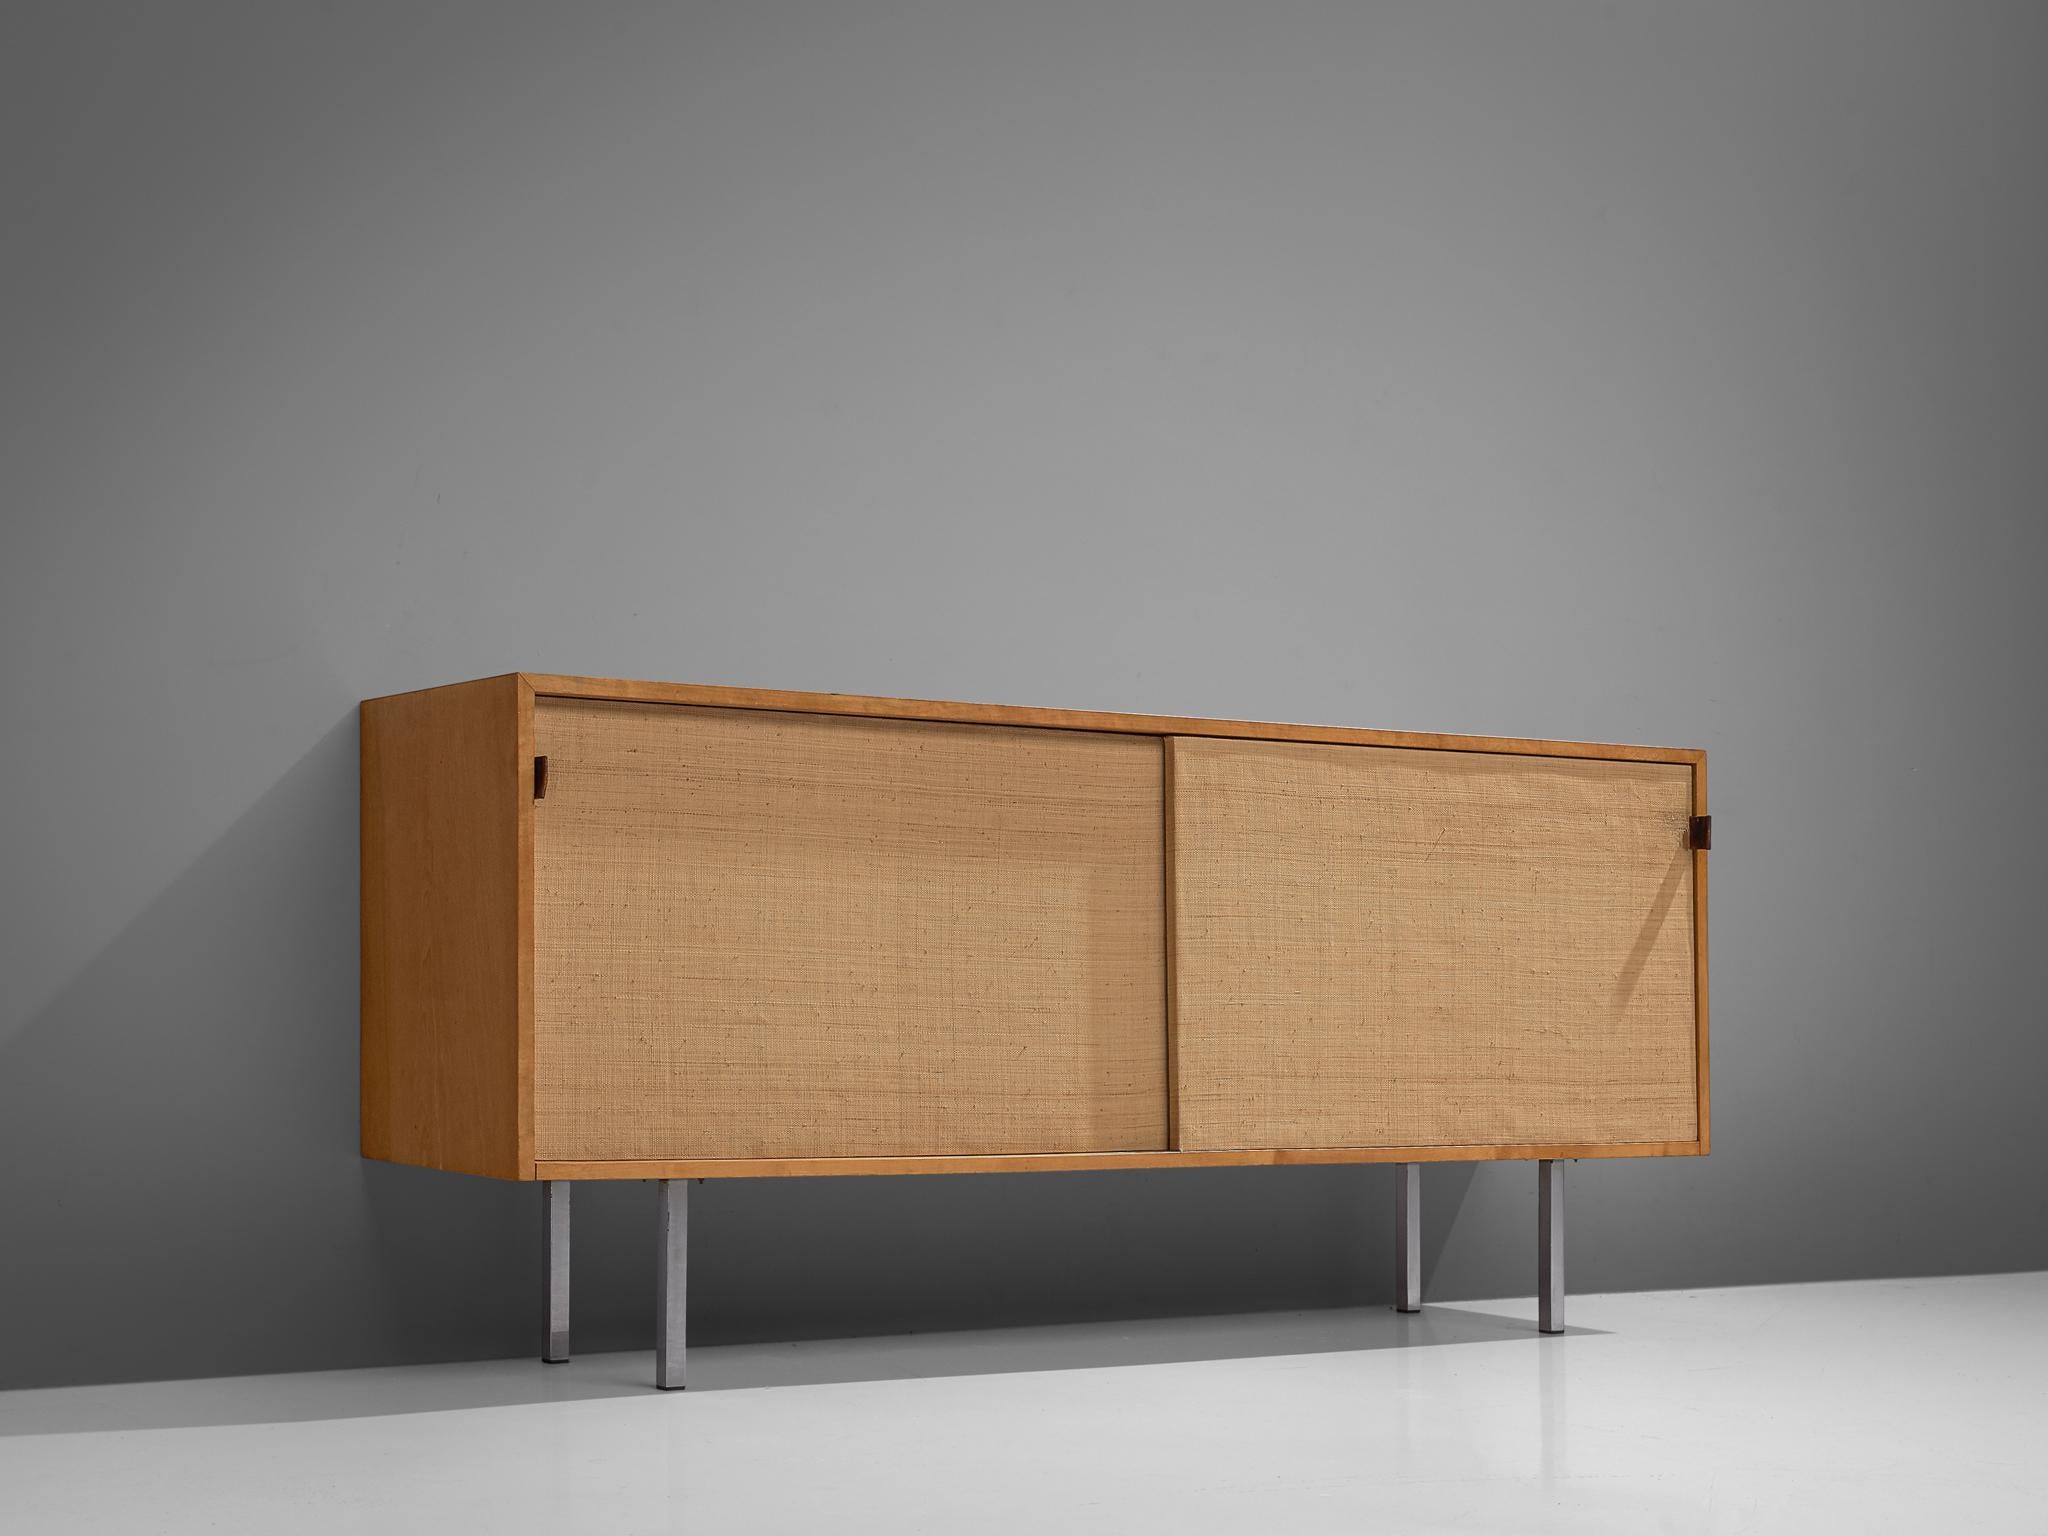 Florence Knoll for Knoll International, sideboard, cane, wood and metal, United States, 1961.

This sideboard is designed by Florence Knoll for Knoll International and was designed for the headquarters of Knoll in Italy. The credenza is executed